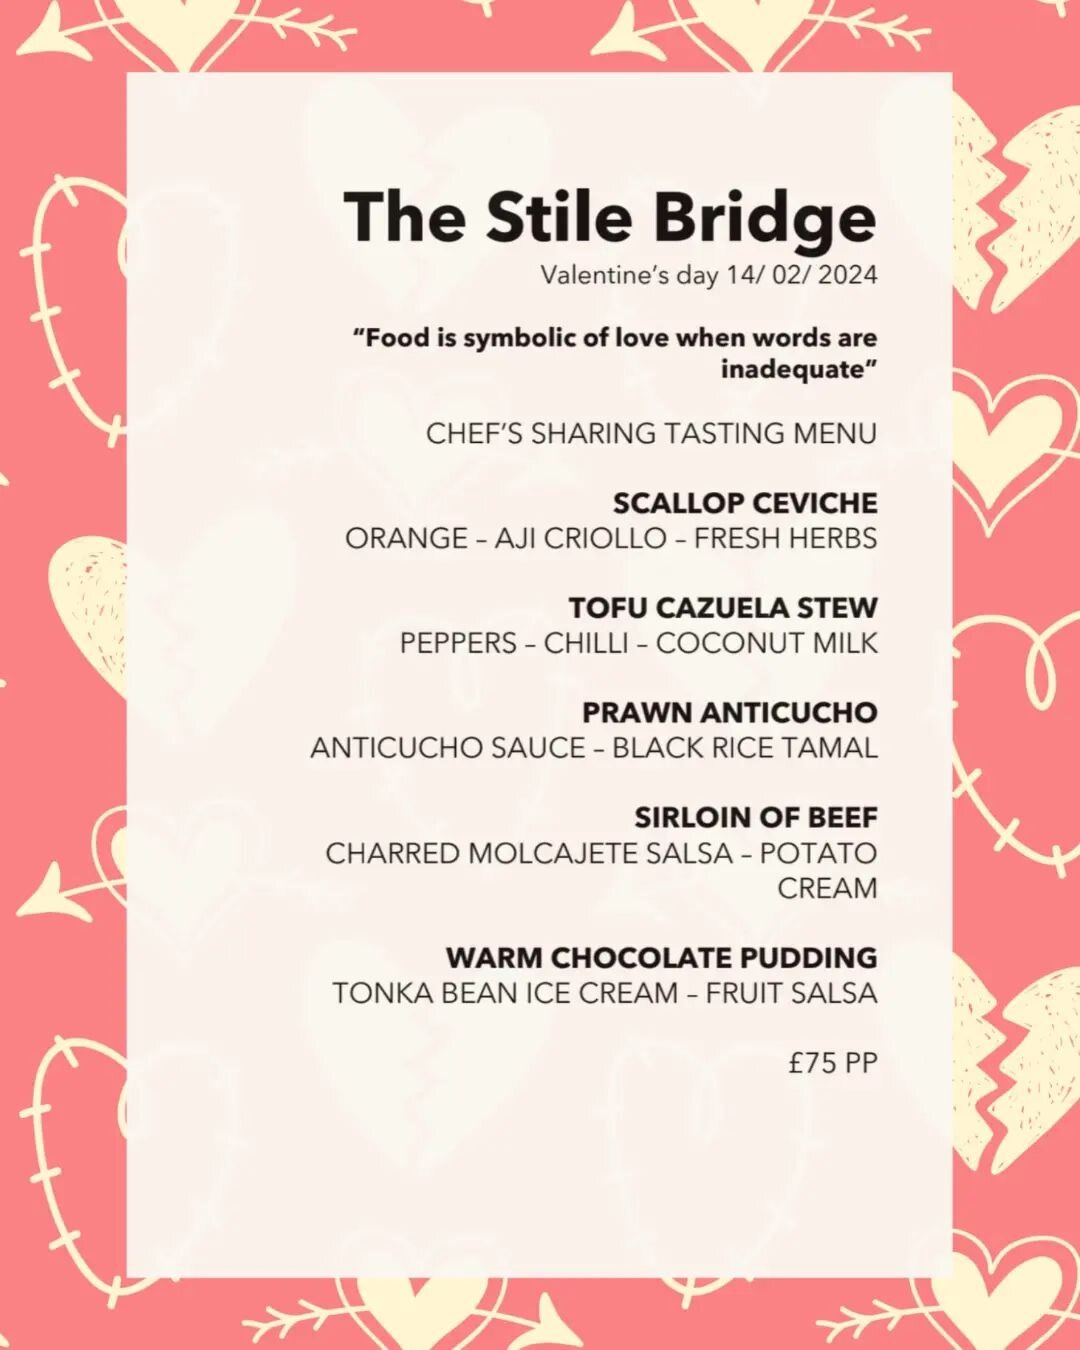 Looking to treat someone special this valentines day? Spend an evening at the Stile Bridge and celebrate love with a memorable 5 course tasting menu for 2. 

Book now to reserve a table.